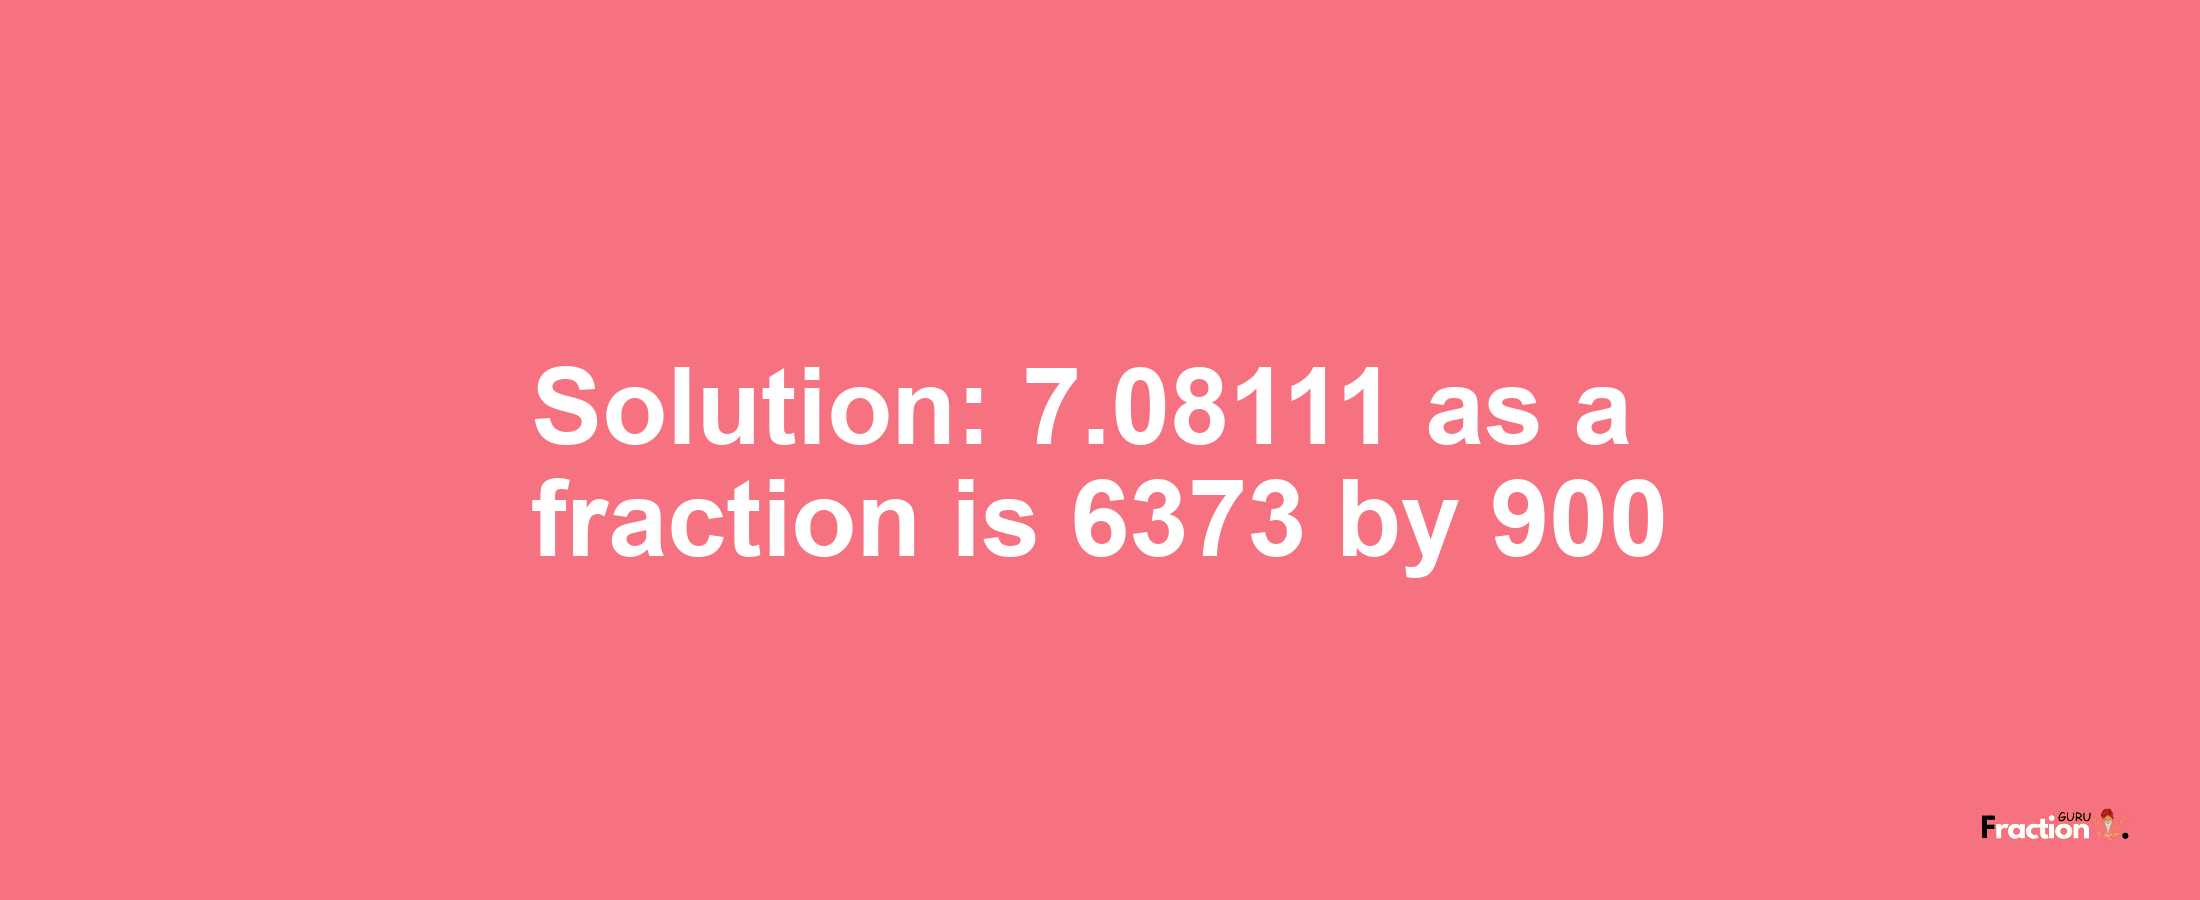 Solution:7.08111 as a fraction is 6373/900